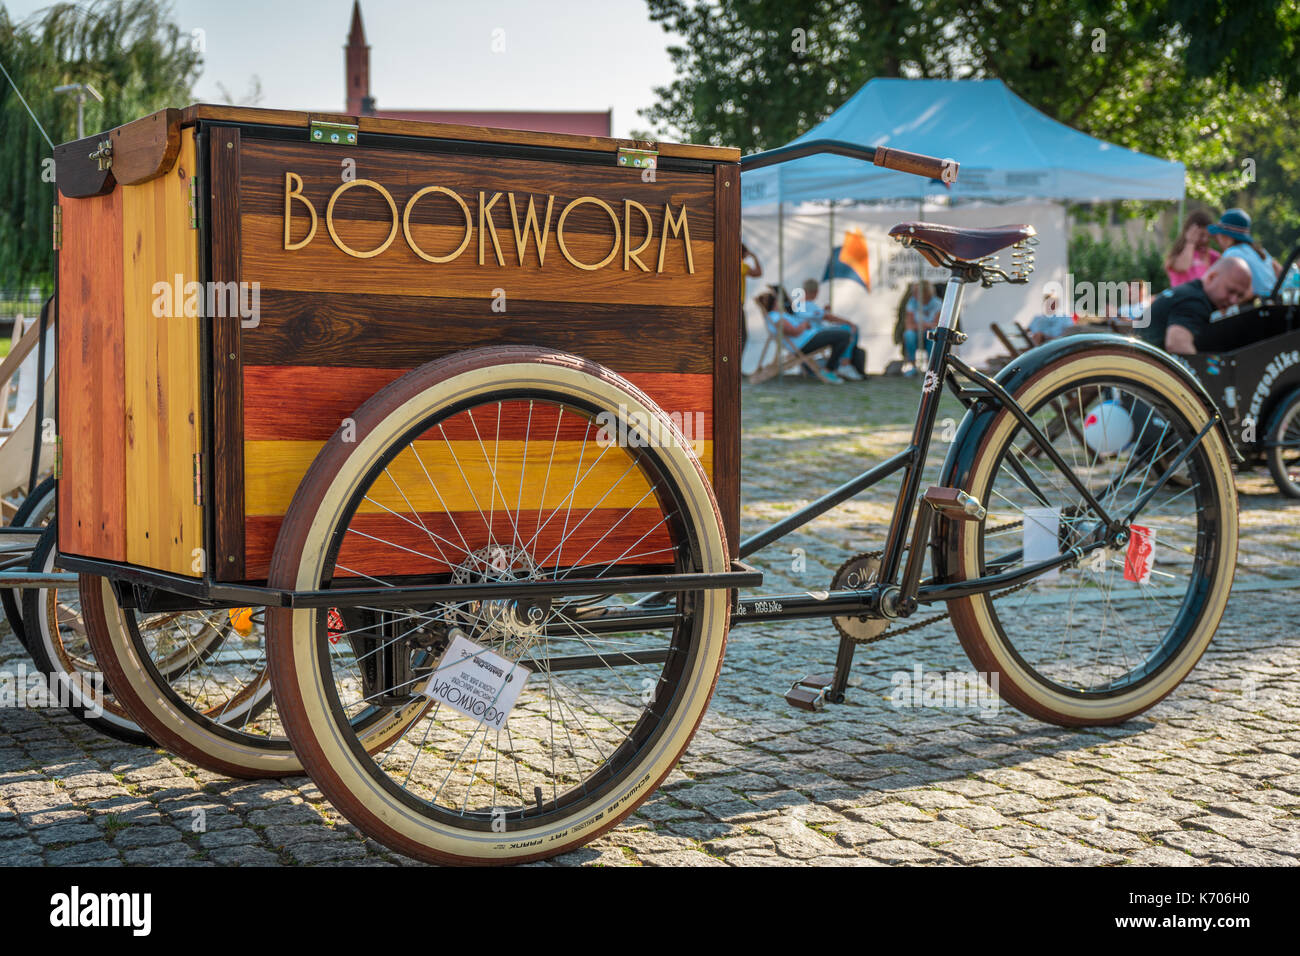 Vintage tricycle/ bicycle with a wooden book compartment at the front, seen in downtown Wroclaw, Poland Stock Photo